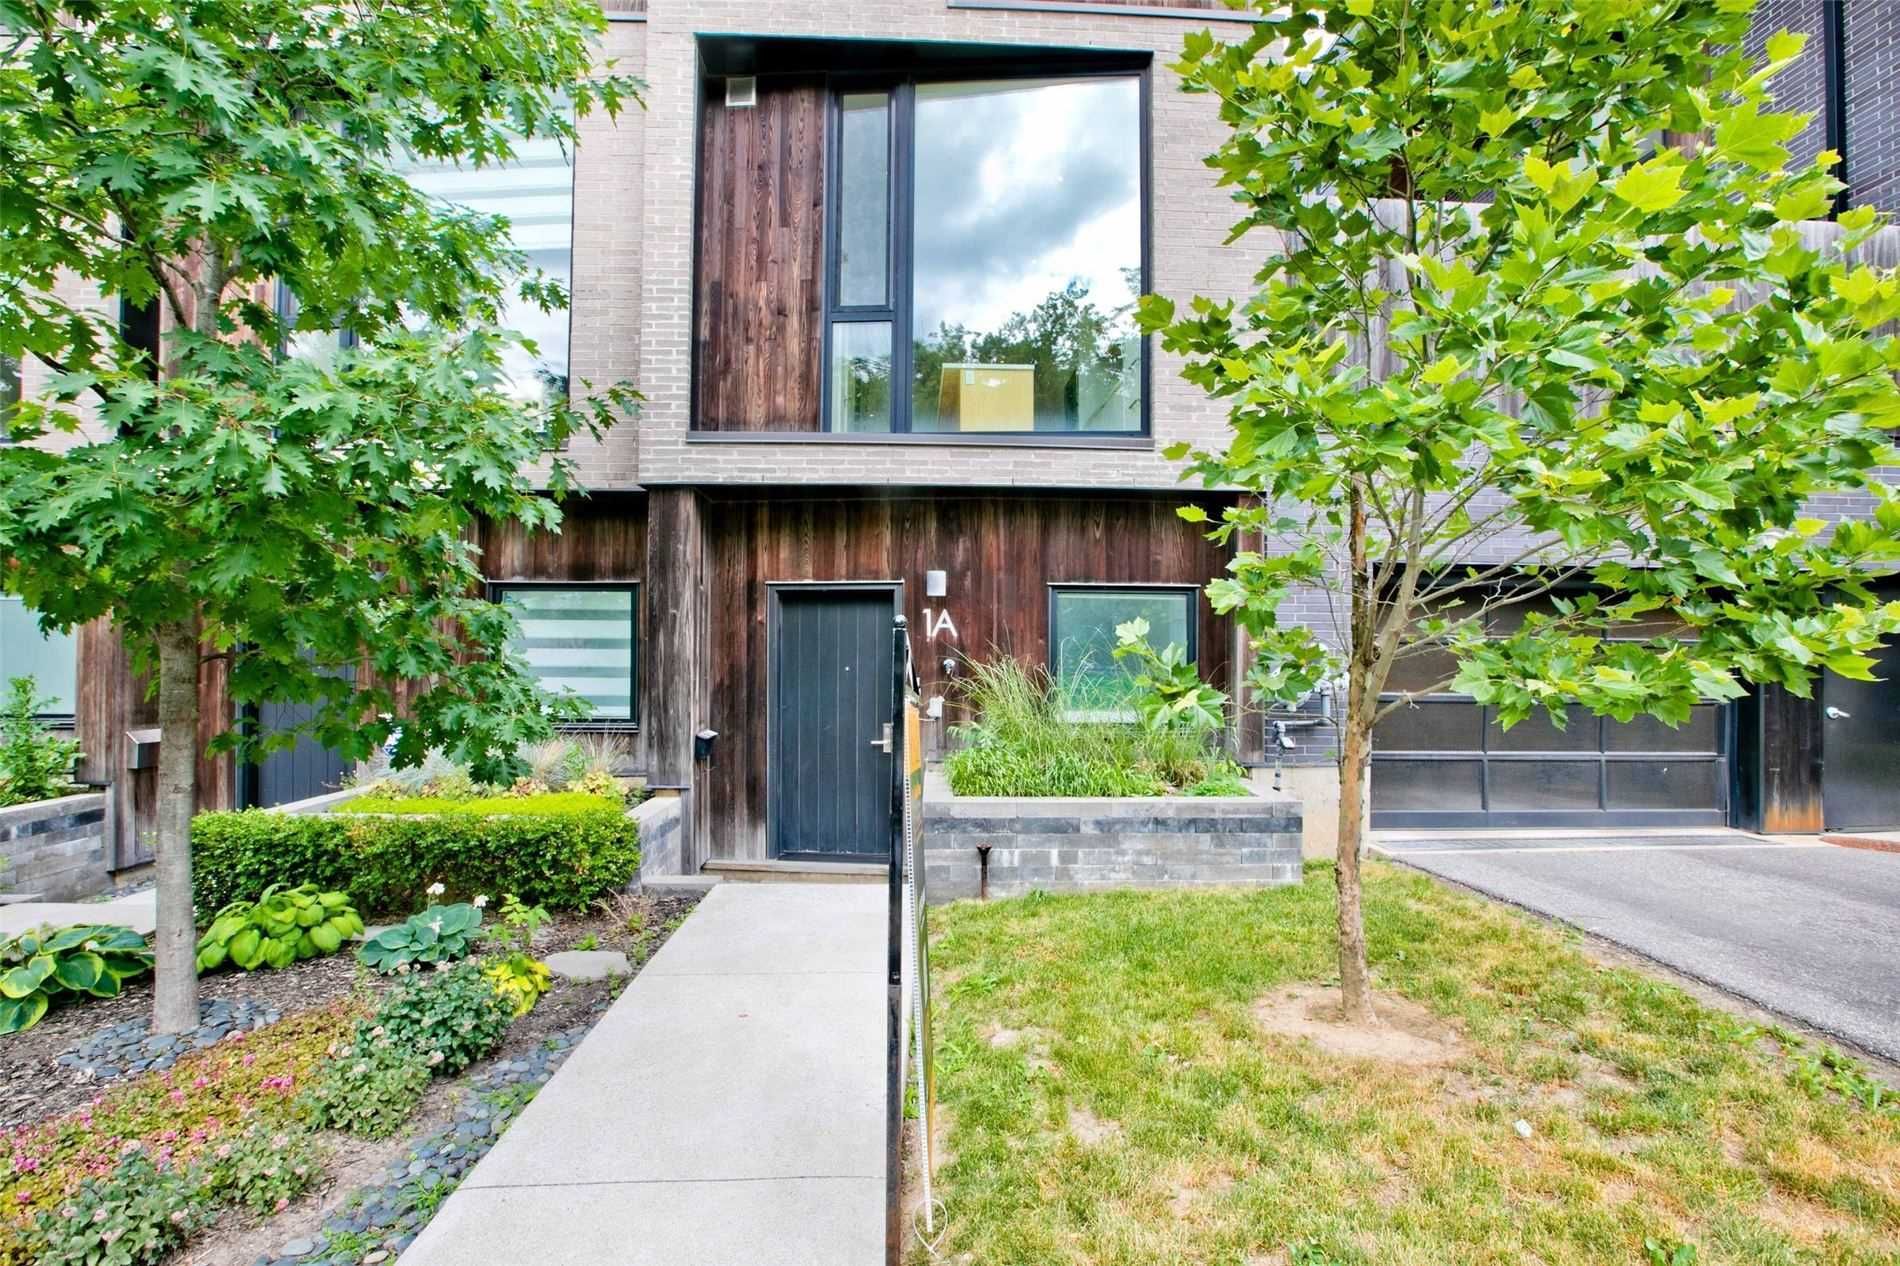 Main Photo: 1A Walder Avenue in Toronto: Mount Pleasant East House (Other) for sale (Toronto C10)  : MLS®# C5688429